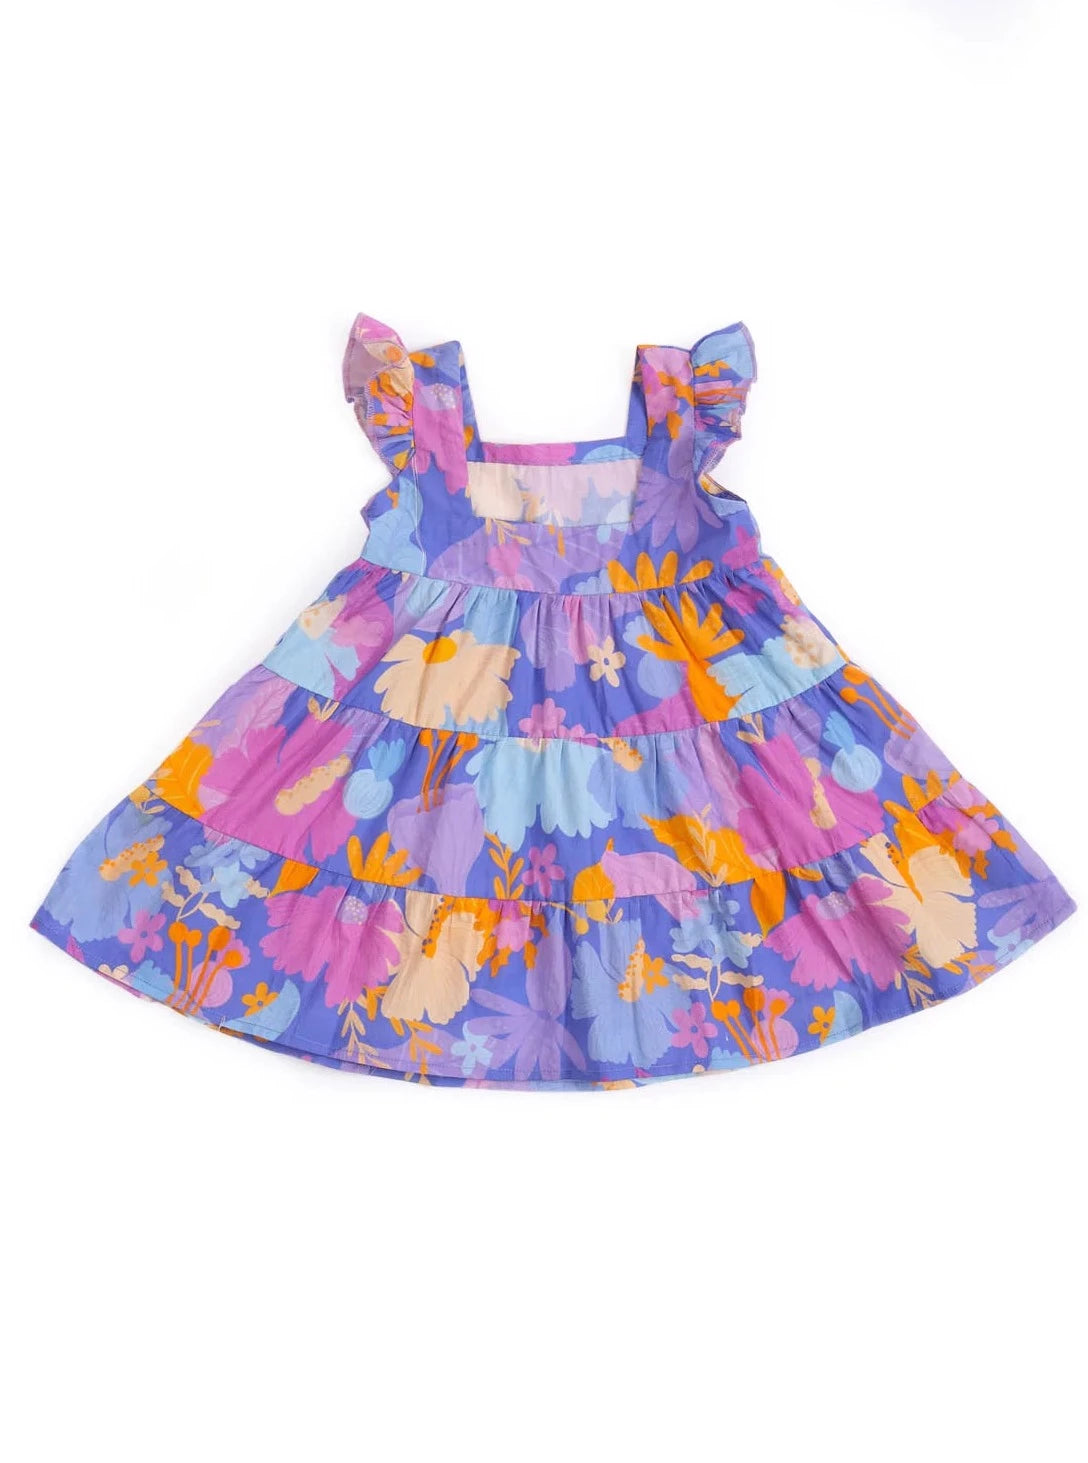 MIKO LOLO Daffy Tiered Frock in Organic Cotton